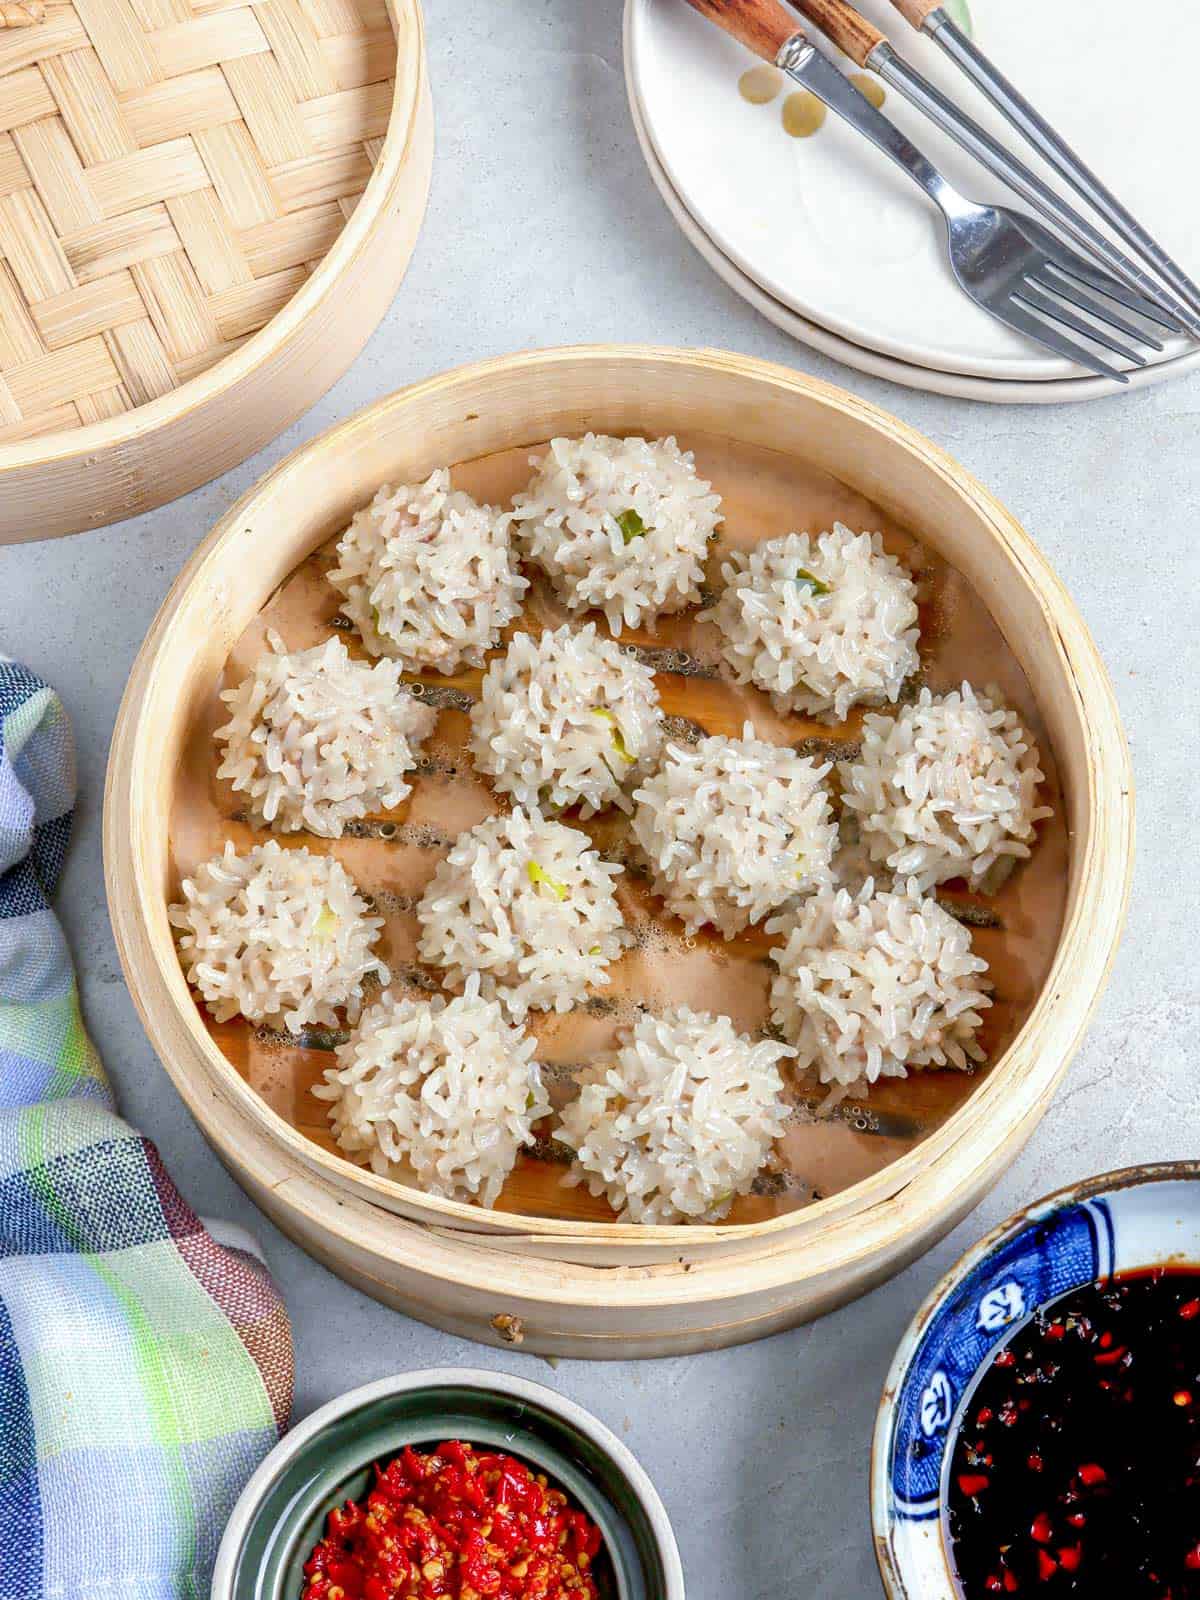 Edit Post Switch to draft Preview Update Image: Change block type or style Change alignment Replace Add title Chinese Pearl Balls Meaty and juicy with sticky rice coating, these Chinese Pearl Balls are super yummy and bursting with flavor. They're the perfect addition to a Chinese New Year celebration or any holiday menu. Chinese Pearl Balls on a plate with dipping sauce and steamer basket on the side Chinese Pearl Balls Table of Contents Filipino New Year celebrations are steeped in tradition and superstitions. I remember being a young child in tow as my mother frantically scoured grocery stores a day before New Year, in search of twelve kinds of round fruits to serve as a centerpiece for our festivities. I am sure you share my Media Noche memories of pancit guisado for long life or BBQ pork on a stick for prosperity. And, of course, dishes made with glutinous rice such as bringhe or biko to make good fortune "stick" throughout the coming year. How about banging on pots and pans and blowing on torotots? Or jumping up and down like crazy at the strike of midnight in polka dot undies? glutinous rice, ground pork, shitake mushrooms, soy sauce, onions, garlic What are Chinese Pearl Balls Chinese Pearl Balls are traditionally served on Chinese New Year to symbolize togetherness and reunion. The name comes from the fact they look like giant pearls, as the grains of rice turn pearly in color when cooked. These porcupine meatballs are basically made with pork meatball covered in sticky rice. The filling consists of ground pork, shitake mushrooms, water chestnuts, green onions and seasonings which are turned into small balls and then rolled in glutinous rice. These fun and tasty appetizers are similar to siomai when it come to the stuffing, the difference between them are how they are wrapped. Ingredient notes Glutinous Rice also known as sticky rice or sweet rice and are typically grown in Asian countries. It has a white grain that turns shiny, translucent and sticky when cooked. Dried Shiitake Mushrooms are commonly used in Chinese or other Asian cuisines. It adds an intense umami and smoky flavor and fragrance to any dish. Ground Pork or minced pork is usually made from pork shoulder or also known as the Boston butt or pork butt. You may substitute it with ground chicken, if preferred. Water Chestnuts are aquatic tuber vegetables grown in some parts of Asia, Africa and Australia. It resembles to an actual chestnut in color and shape, however it is not an actual nut. Ginger is hot and fragrant with a bamboo-like appearance. It is widely used as a spice, medicine and even as a delicacy. Green Onions also known as scallions are harvested young onions with bright green leaves and underdeveloped bulbs. Garlic is virtually used in the cuisines all over the world. It has a unique and intense flavor and aroma that makes it a popular flavoring agent. Soy Sauce is a dark brown liquid condiment that is considered to have a strong umami flavor. Chinese cooking wine also known as Shaoxing Wine is a rice wine usually used in Chinese cuisines. It has a harsh alcoholic flavor and is salty. In a pinch, you could substitute it with dry sherry, mirin or cooking sake. Sesame oil is derived from sesame seeds. It has a nutty, earthy flavor and used to enhance flavors in many dishes. Egg is used as a binder for the meat. Soak the glutinous rice in water for an hour to ensure the grains cook and absorb moisture evenly. Stir the meat mixture stirring in just one circular direction until it becomes sticky and fluffy. You can add chopped shrimp or ground fish fillet to the meat mixture for extra flavor. It is important to the line steamer to prevent the Chinese Pearl Balls from sticking. To Serve and store Serve the Chinese Pearl Balls warm with soy sauce-chili dipping sauce or sweet chili sauce. Store leftover meatballs in an airtight container and keep in the refrigerator for up to 4 days or in the freezer for up to 2 months. To reheat, steam the meatballs again. If using a microwave, place the pearl balls in a bowl and add a few drops of water. Cover the bowl with a plate, this will prevent the meatballs from drying out. Did you make this? Be sure to leave a review below and tag me @kawalingpinoy on Facebook and Instagram! Chinese Pearl Balls Prep Time: 20 mins Cook Time: 30 mins Total Time: 1 d Author: Lalaine Manalo Print Pin It Email Recipe 2 Dozens Ingredients 1 cup glutinous rice 2 pieces dried shitake mushrooms 1 pound ground pork ¼ cup water chestnuts finely chopped 1 thumb-size ginger peeled and minced 2 green onions ends trimmed and chopped 2 cloves garlic peeled and minced 1 tablespoon soy sauce 1 tablespoon Chinese cooking wine 1 teaspoon sesame oil 1 egg beaten ½ teaspoon salt ¼ teaspoon pepper Dipping Sauce soy sauce to taste chili sauce to taste Instructions In a bowl, combine glutinous rice and enough water to cover. Soak for at at least 6 hours or overnight for best results. In a colander, drain well and transfer into a wide plate. In a small bowl with warm water, soak shitake mushrooms until softened. Using hands, squeeze liquid and then mince. In a bowl, combine ground pork, water chestnuts, mushrooms, ginger, green onions, garlic, soy sauce, wine, sesame oil, egg, salt and pepper. Gently stir to combine. Form meat mixture into balls of about 1-inch diameter. Gently roll each ball in rice to fully coat, pressing rice onto meat. Line a steamer with wax paper or Chinese cabbage leaves. Arrange rice-coated meatballs in a single layer on steamer at about ½ inch apart. Steam for about 20 to 30 minutes or until rice and meat are cooked through. Serve with dipping sauce. Notes For moist meatballs, use ground pork with about higher percent of fat. If meat mixture is too soft to shape or roll in rice, freeze for about 10 to 15 minutes to firm up. “This website provides approximate nutrition information for convenience and as a courtesy only. Nutrition data is gathered primarily from the USDA Food Composition Database, whenever available, or otherwise other online calculators.” Did You Make This? Mention @KawalingPinoy and hashtag your photo with #KawalingPinoy Share Rate It ﻿ Toggle panel: Yoast SEO Premium SEO Readability Schema Social Focus keyphraseHelp on choosing the perfect focus keyphrase(Opens in a new browser tab) Chinese pearl balls Get related keyphrases(Opens in a new browser window) Google preview Preview as: Mobile resultDesktop result Url preview:www.kawalingpinoy.com › chinese-pearl-ballsSEO title preview: Chinese Pearl Balls - Kawaling Pinoy Meta description preview: Oct 10, 2014 － Traditionally served on Chinese New Year, chinese pearl balls are pork meatballs rolled in sticky rice and then steamed until rice cooks into a ... SEO title Insert variable Title Page Separator Site title Site title Title Primary category Separator Slug chinese-pearl-balls Meta description Insert variable Traditionally served on Chinese New Year, chinese pearl balls are pork meatballs rolled in sticky rice and then steamed until rice cooks into a pearl-white coating Site title Title Primary category Separator SEO analysisGood Chinese pearl balls Add related keyphrase Cornerstone content Insights Advanced Toggle panel: AdThrive Ads Disable all ads Disable content ads Disable auto-insert video players Re-enable ads on All ads on this post will be enabled on the specified date Disable Video Metadata Disable adding metadata to video player on this post Toggle panel: Scripts Header Scripts Output before the closing head tag, after sitewide header scripts. Body Scripts Body Scripts Position Bottom: before closing body tag Toggle panel: Grow: Share Options Social Media Image Select Image Social Media Title70 Characters Remaining Write a social media title... Social Media Description200 Characters Remaining Write a social media description... Pinterest Image Select Image Pinterest Title70 Characters Remaining Write a custom Pinterest title... Please note: Pinterest does not yet support pin titles. Pinterest is still in the process of releasing this feature. We've added the field in advance, to make sure you're ready for when the feature rolls out. Pinterest Description500 Characters Remaining Write a custom Pinterest description... Custom Tweet256 Characters Remaining Write a custom tweet... Maximum characters is based off of the Twitter maximum, the post permalink, and whether your Twitter username is included in the tweet. Display Options Hide buttons for theInline ContentFloating SidebarPop-UpFollow WidgetSticky Bar Show buttons for theInline ContentFloating SidebarPop-UpFollow WidgetSticky Bar Toggle panel: Grow: Share Statistics NetworkShares|% Facebook 16|5.06 Pinterest 300|94.94 Total shares316 Refresh shares Social Shares Recovery If you have ever modified the permalink for this particular post and want to recover lost shares for any previous links this post had, add the old links by pressing the Add Link button. Add Link Toggle panel: Related Posts Add Related Posts Sticky Rice Balls with Peanuts Edit Post | Unlink Related Post Bacon Fried Rice Edit Post | Unlink Related Post Java Rice Edit Post | Unlink Related Post Filipino Pork Barbecue Edit Post | Unlink Related Post Post Block Image Insert an image to make a visual statement. Styles This image has an empty alt attribute; its file name is MtBlanc1.jpg Mont Blanc appears—still, snowy, and serene. Default This image has an empty alt attribute; its file name is MtBlanc1.jpg Mont Blanc appears—still, snowy, and serene. Rounded Default Style Not set Grow by Mediavine Pin Title Chinese Pearl Balls Please note: Pinterest does not yet support pin titles. Pinterest is still in the process of releasing this feature. We've added the field in advance, to make sure you're ready for when the feature rolls out. Pin Description celebration or any holiday menu. Pin Repin ID Disable Pinning Image settings Alt text (alternative text) Chinese Pearl Balls on a plate with dipping sauce and steamer basket on the side Describe the purpose of the image(opens in a new tab)Leave empty if the image is purely decorative. Image size Large Image dimensions Width 768 Height 1024 25%50%75%100% Reset Advanced Skip to the selected block Open publish panel Document Image NotificationsNumber of media items found: 9NerdPress Help Close dialog Select or Upload Media Upload filesMedia Library Expand Details Filter mediaFilter by date All dates Search Chinese Pearl Balls Media list Showing 6 of 6 media items ATTACHMENT DETAILS Saved. pearl-balls-5.jpg October 27, 2021 249 KB 1200 by 1600 pixels Edit Image Delete permanently Alt Text Chinese pearl balls in a steamer Describe the purpose of the image(opens in a new tab). Leave empty if the image is purely decorative.Title Chinese Pearl Balls Caption Description Chinese pearl balls in a steamer File URL: https://www.kawalingpinoy.com/wp-content/uploads/2014/10/pearl-balls-5.jpg Copy URL to clipboard Required fields are marked * Grow Social by Mediavine: Pin Title Chinese Pearl Balls Please note: Pinterest does not yet support pin titles. Pinterest is still in the process of releasing this feature. We've added the field in advance, to make sure you're ready for when the feature rolls out. Grow Social by Mediavine: Pin Description Grow Social by Mediavine: Pin Repin ID Grow Social by Mediavine: Disable Pinning No Regenerate Thumbnails Regenerate Thumbnails Selected media actionsSelect